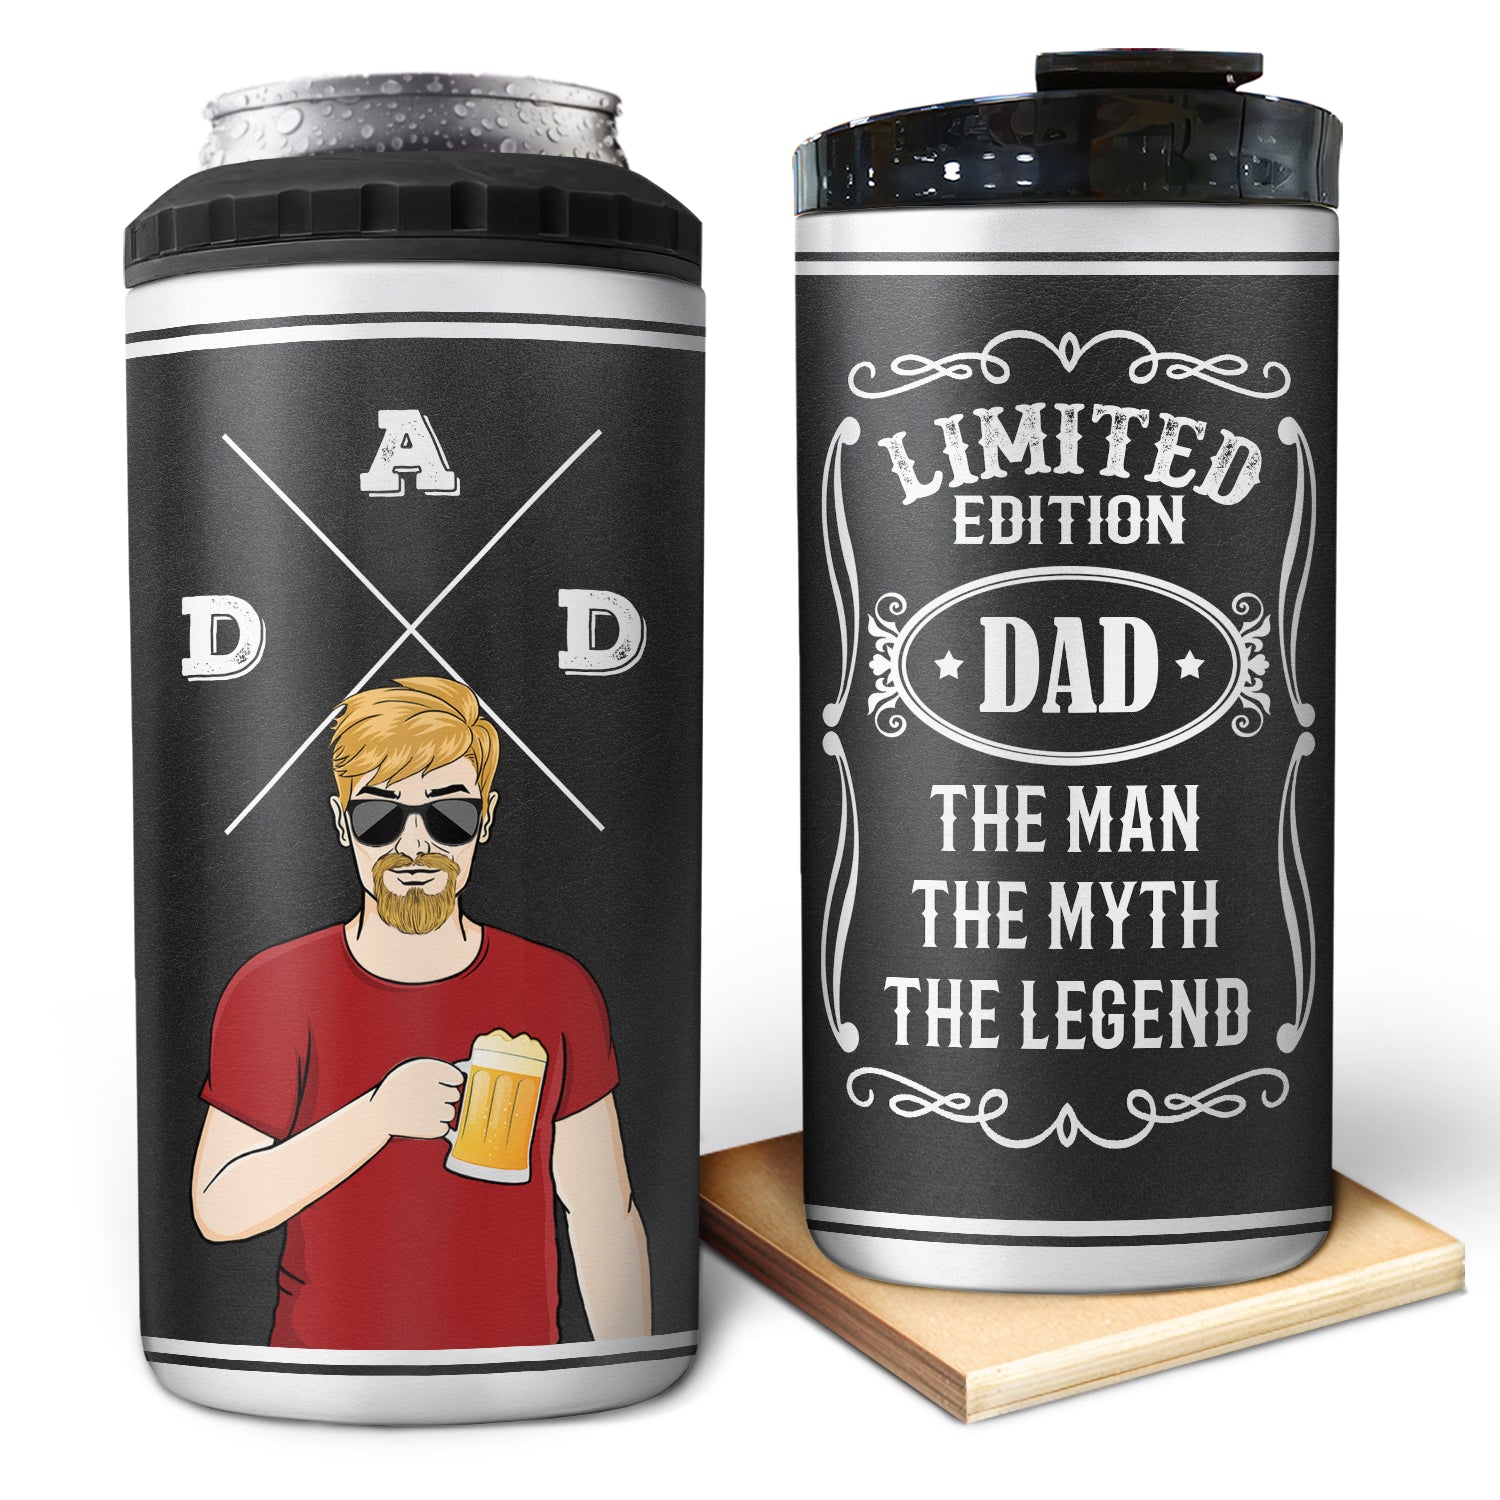 Limited Edition Dad The Man The Myth The Legend - Birthday Gift For Father, Grandpa, Grandma - Personalized Custom 4 In 1 Can Cooler Tumbler